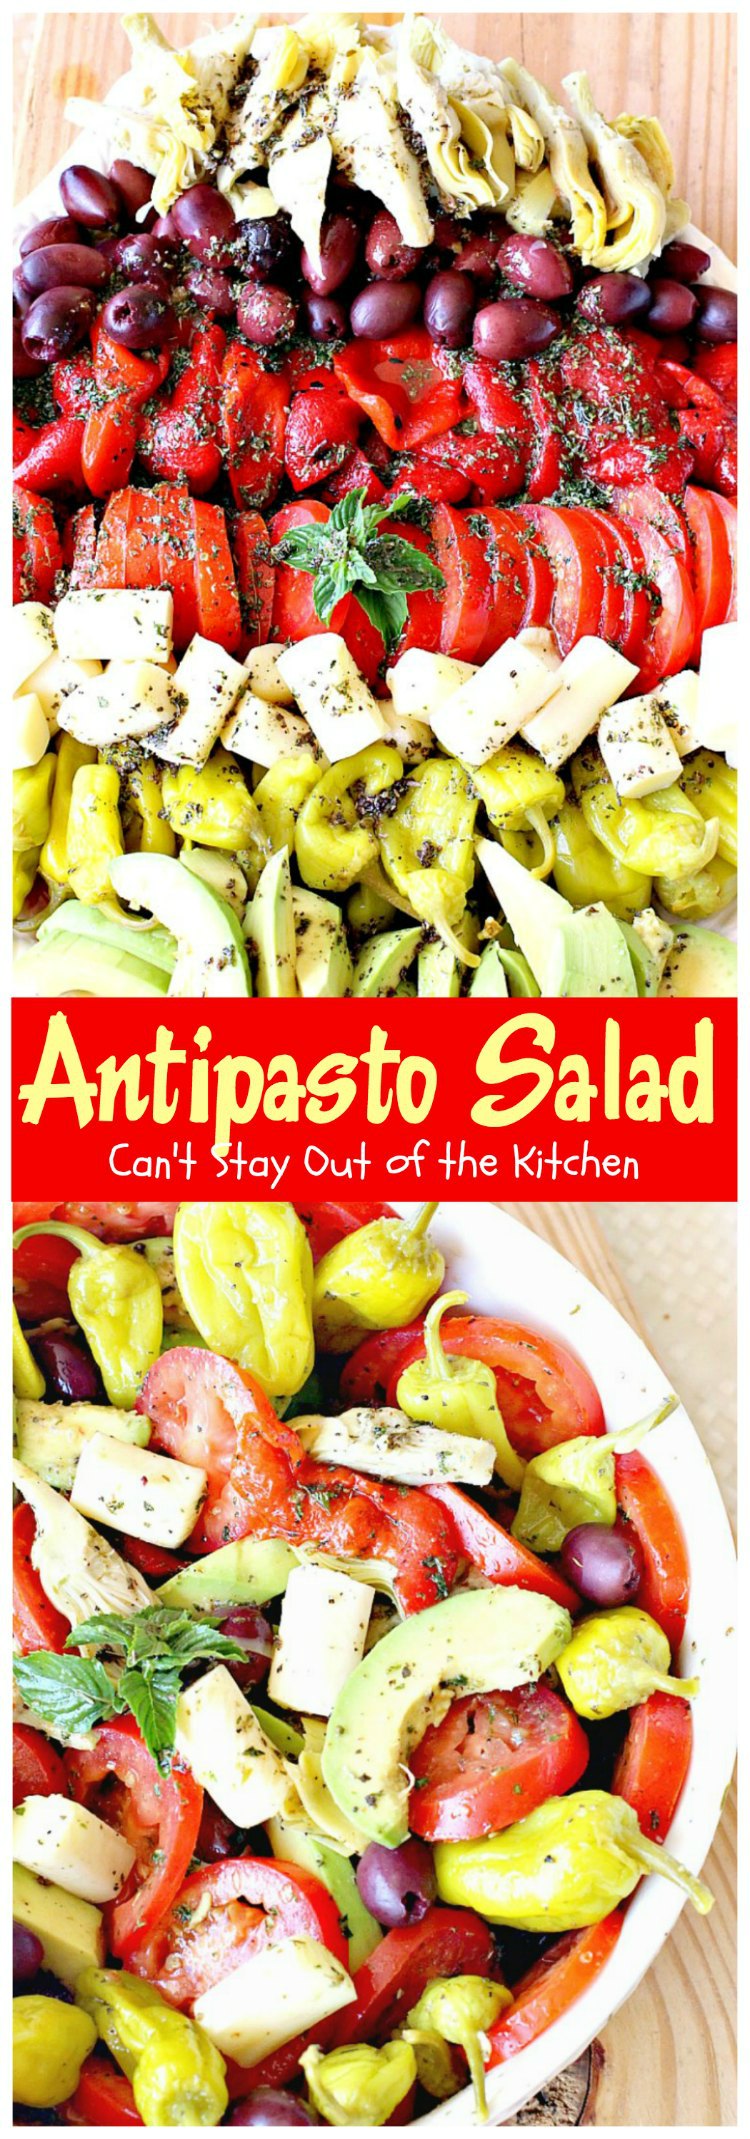 Antipasto Salad | Can't Stay Out of the Kitchen